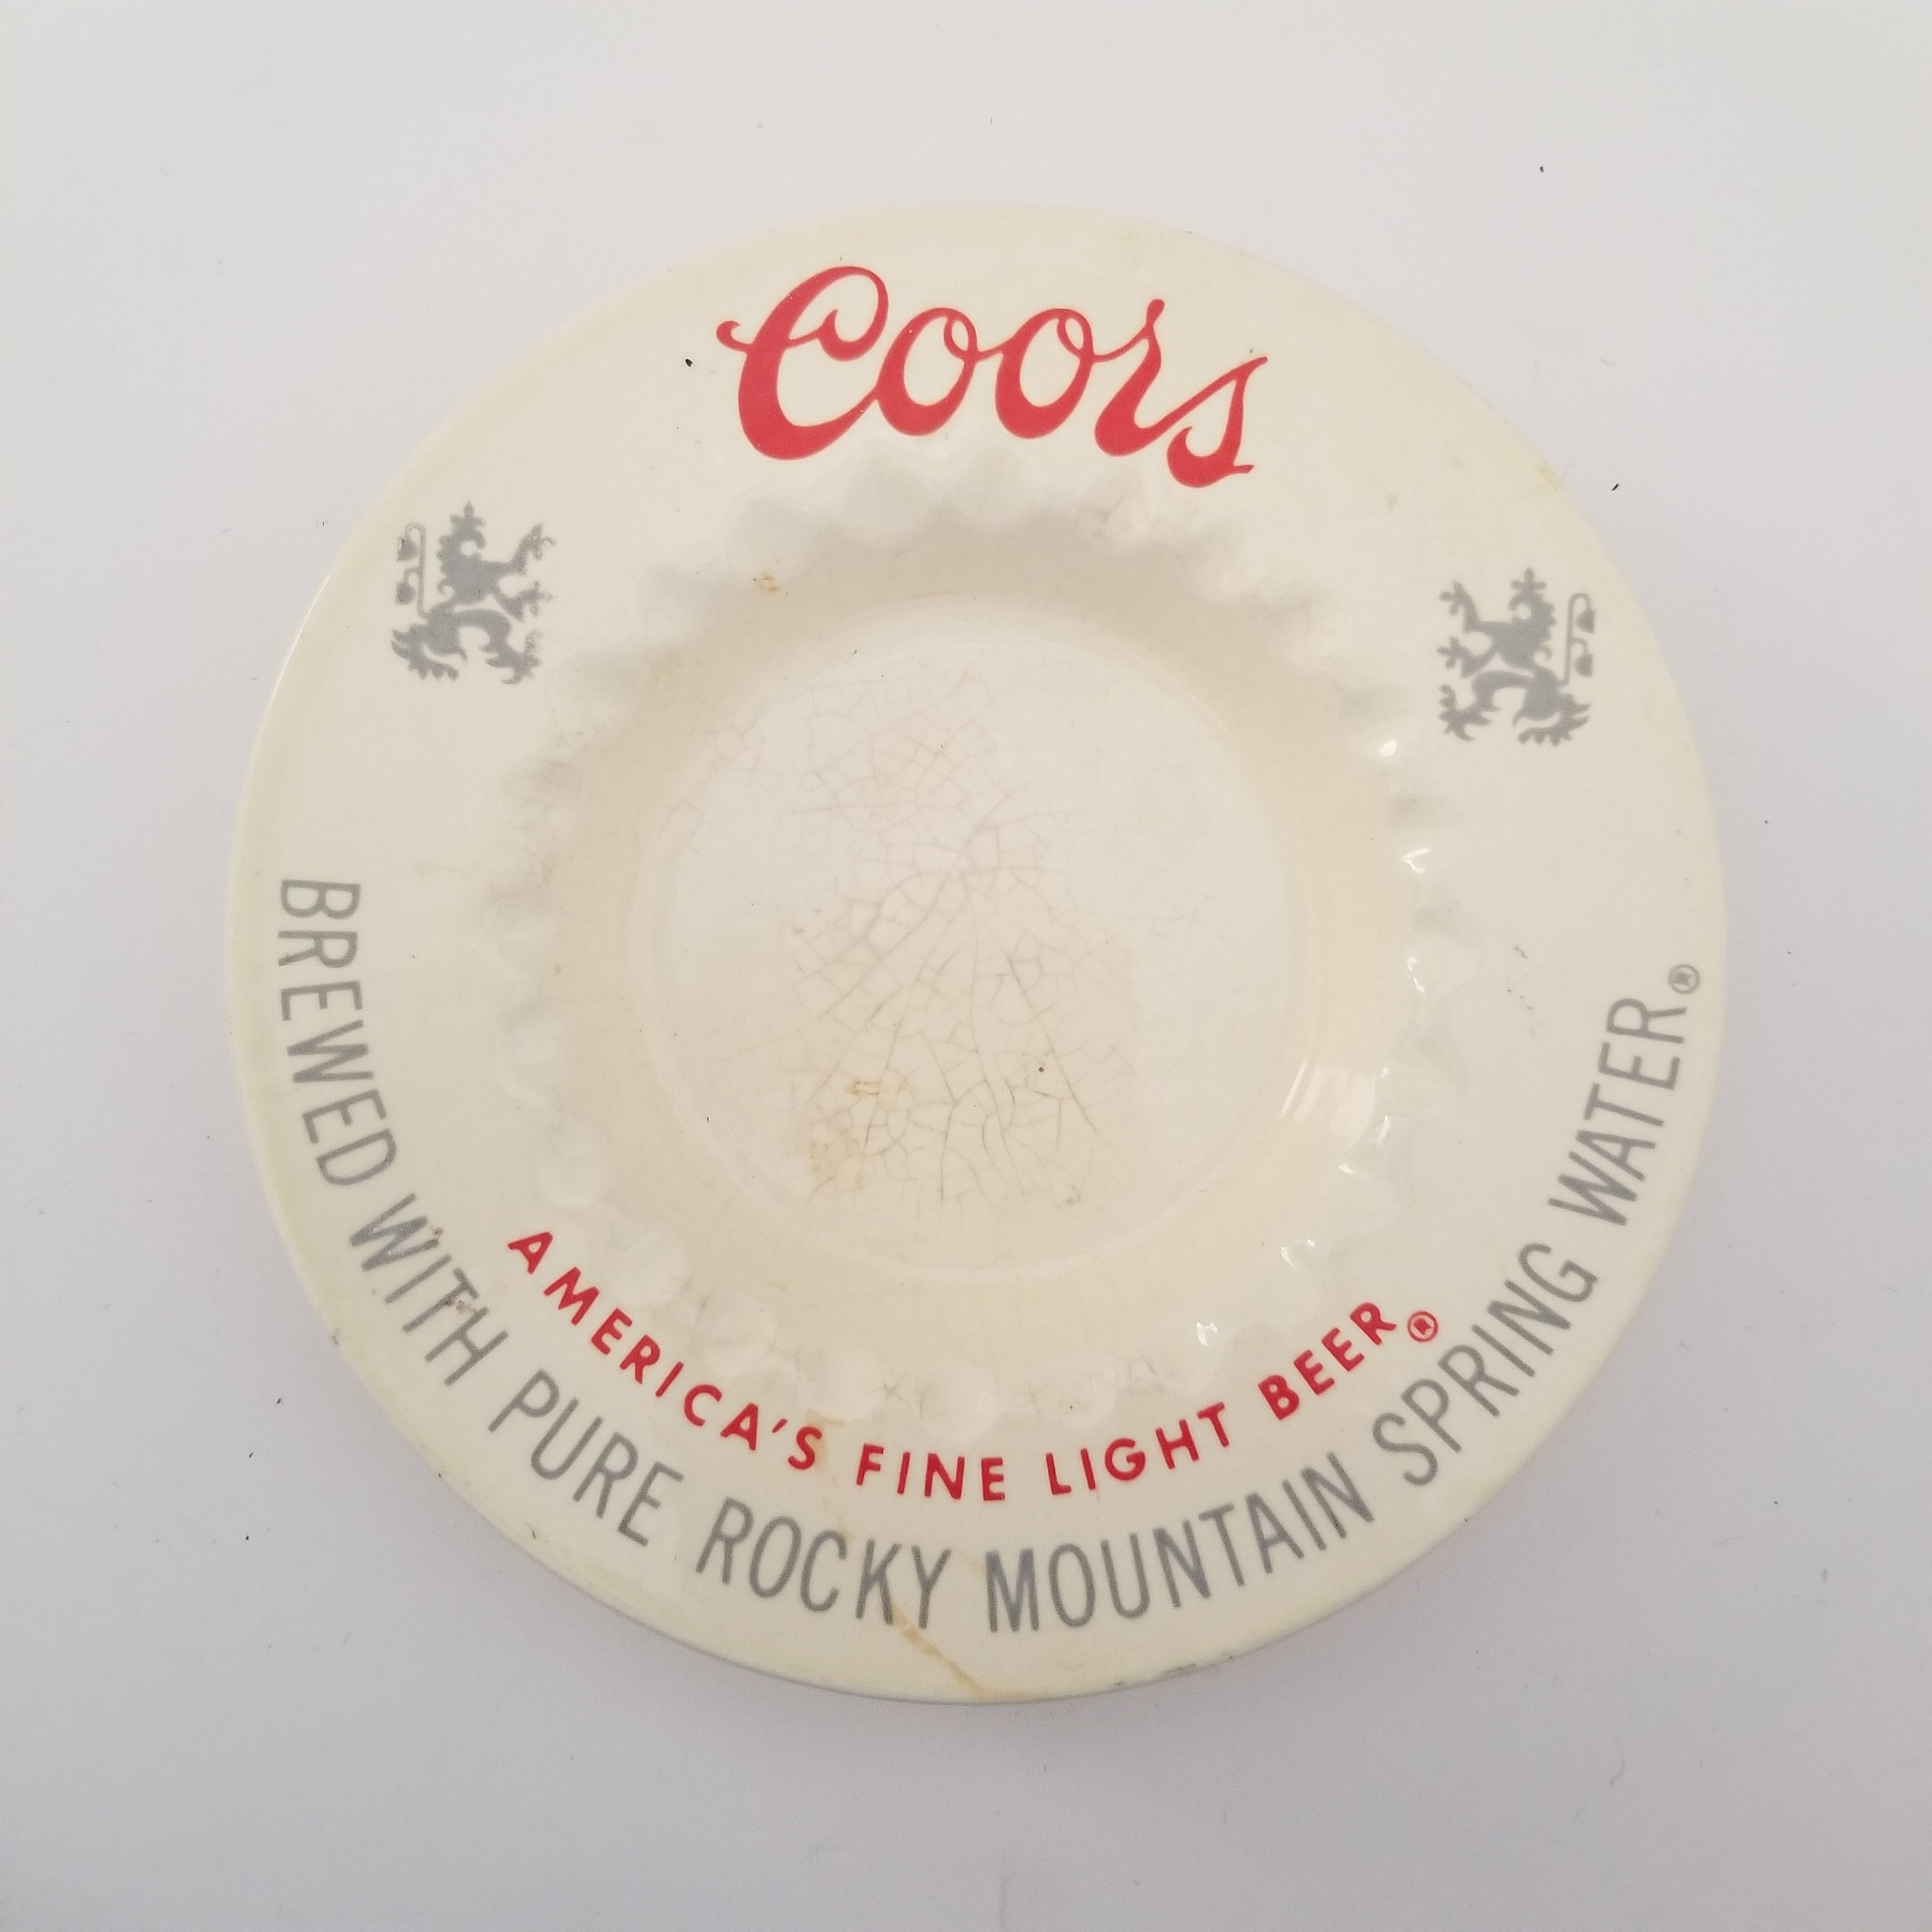 Vintage mid 1950's Coors Beer ashtray, rare version made by Coors in  Golden, Colorado 6 some crazing but no chips or cracks - Etsy België